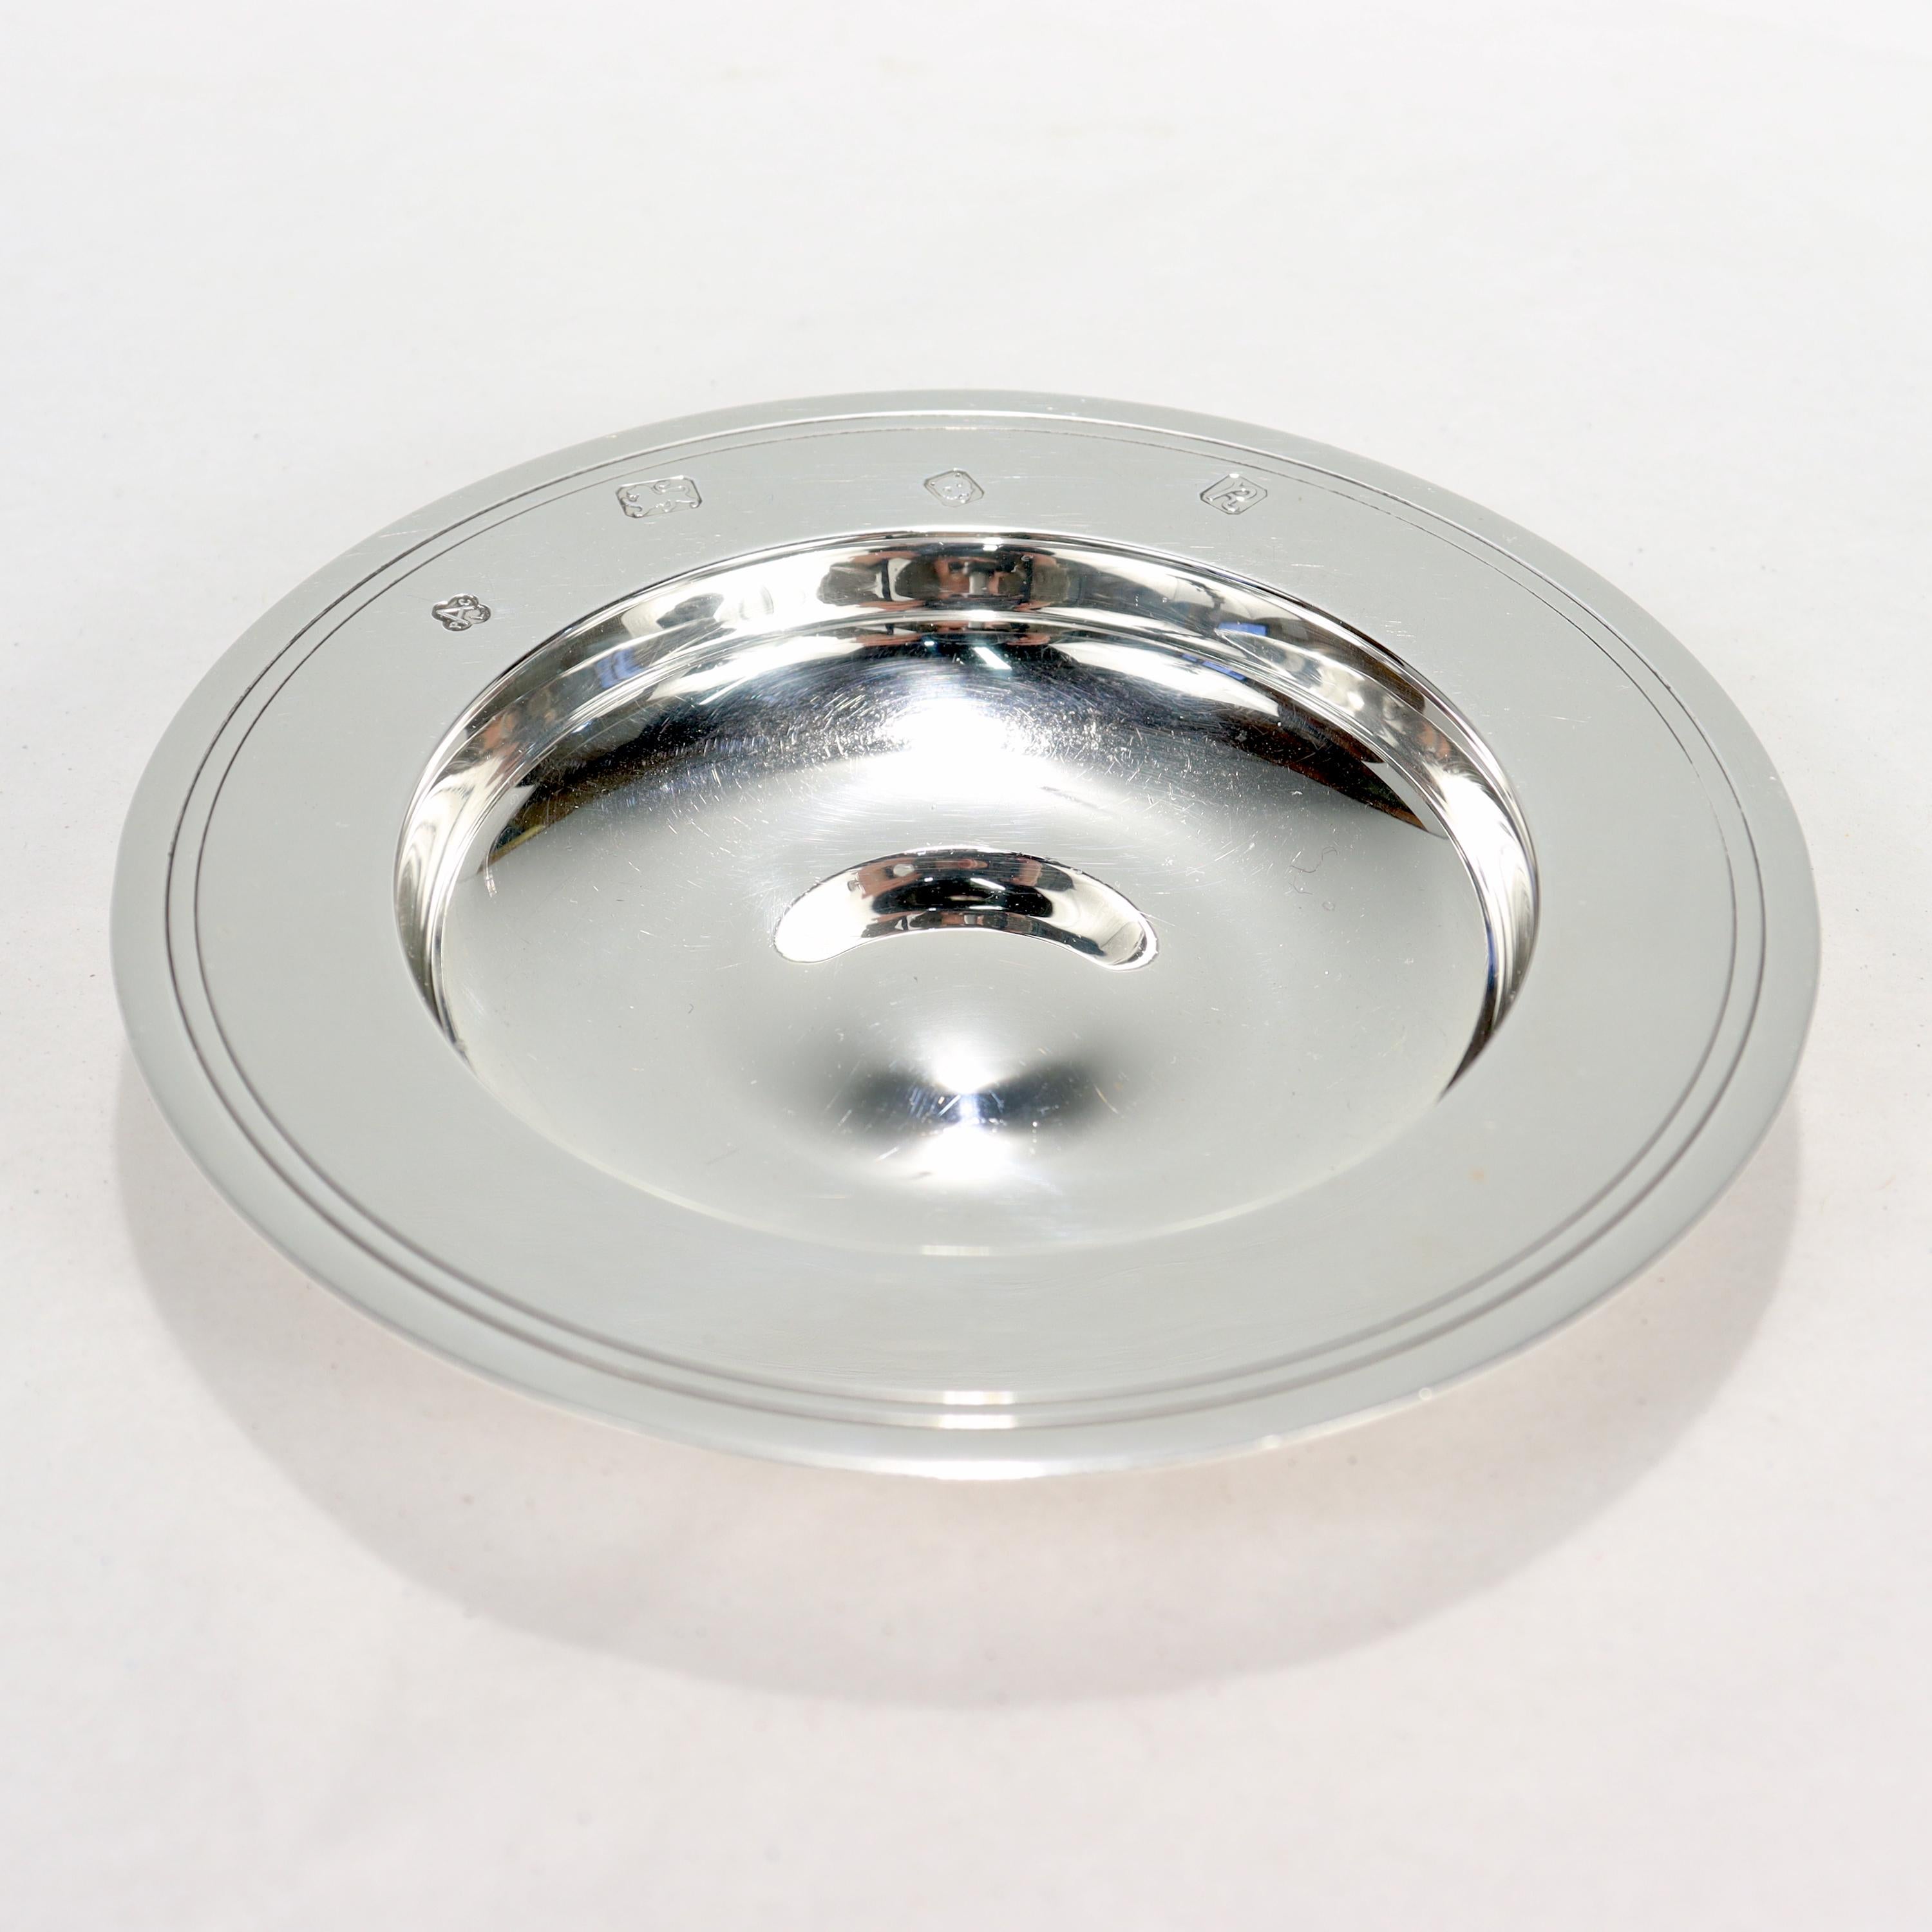 A fine sterling silver dish or plate. 

By Asprey. 

In the Armada pattern.

With hallmarks for Asprey, Sterling, London, and 1991

Simply a great piece from Asprey!

Date:
1991

Overall Condition:
It is in overall good, as-pictured, used estate